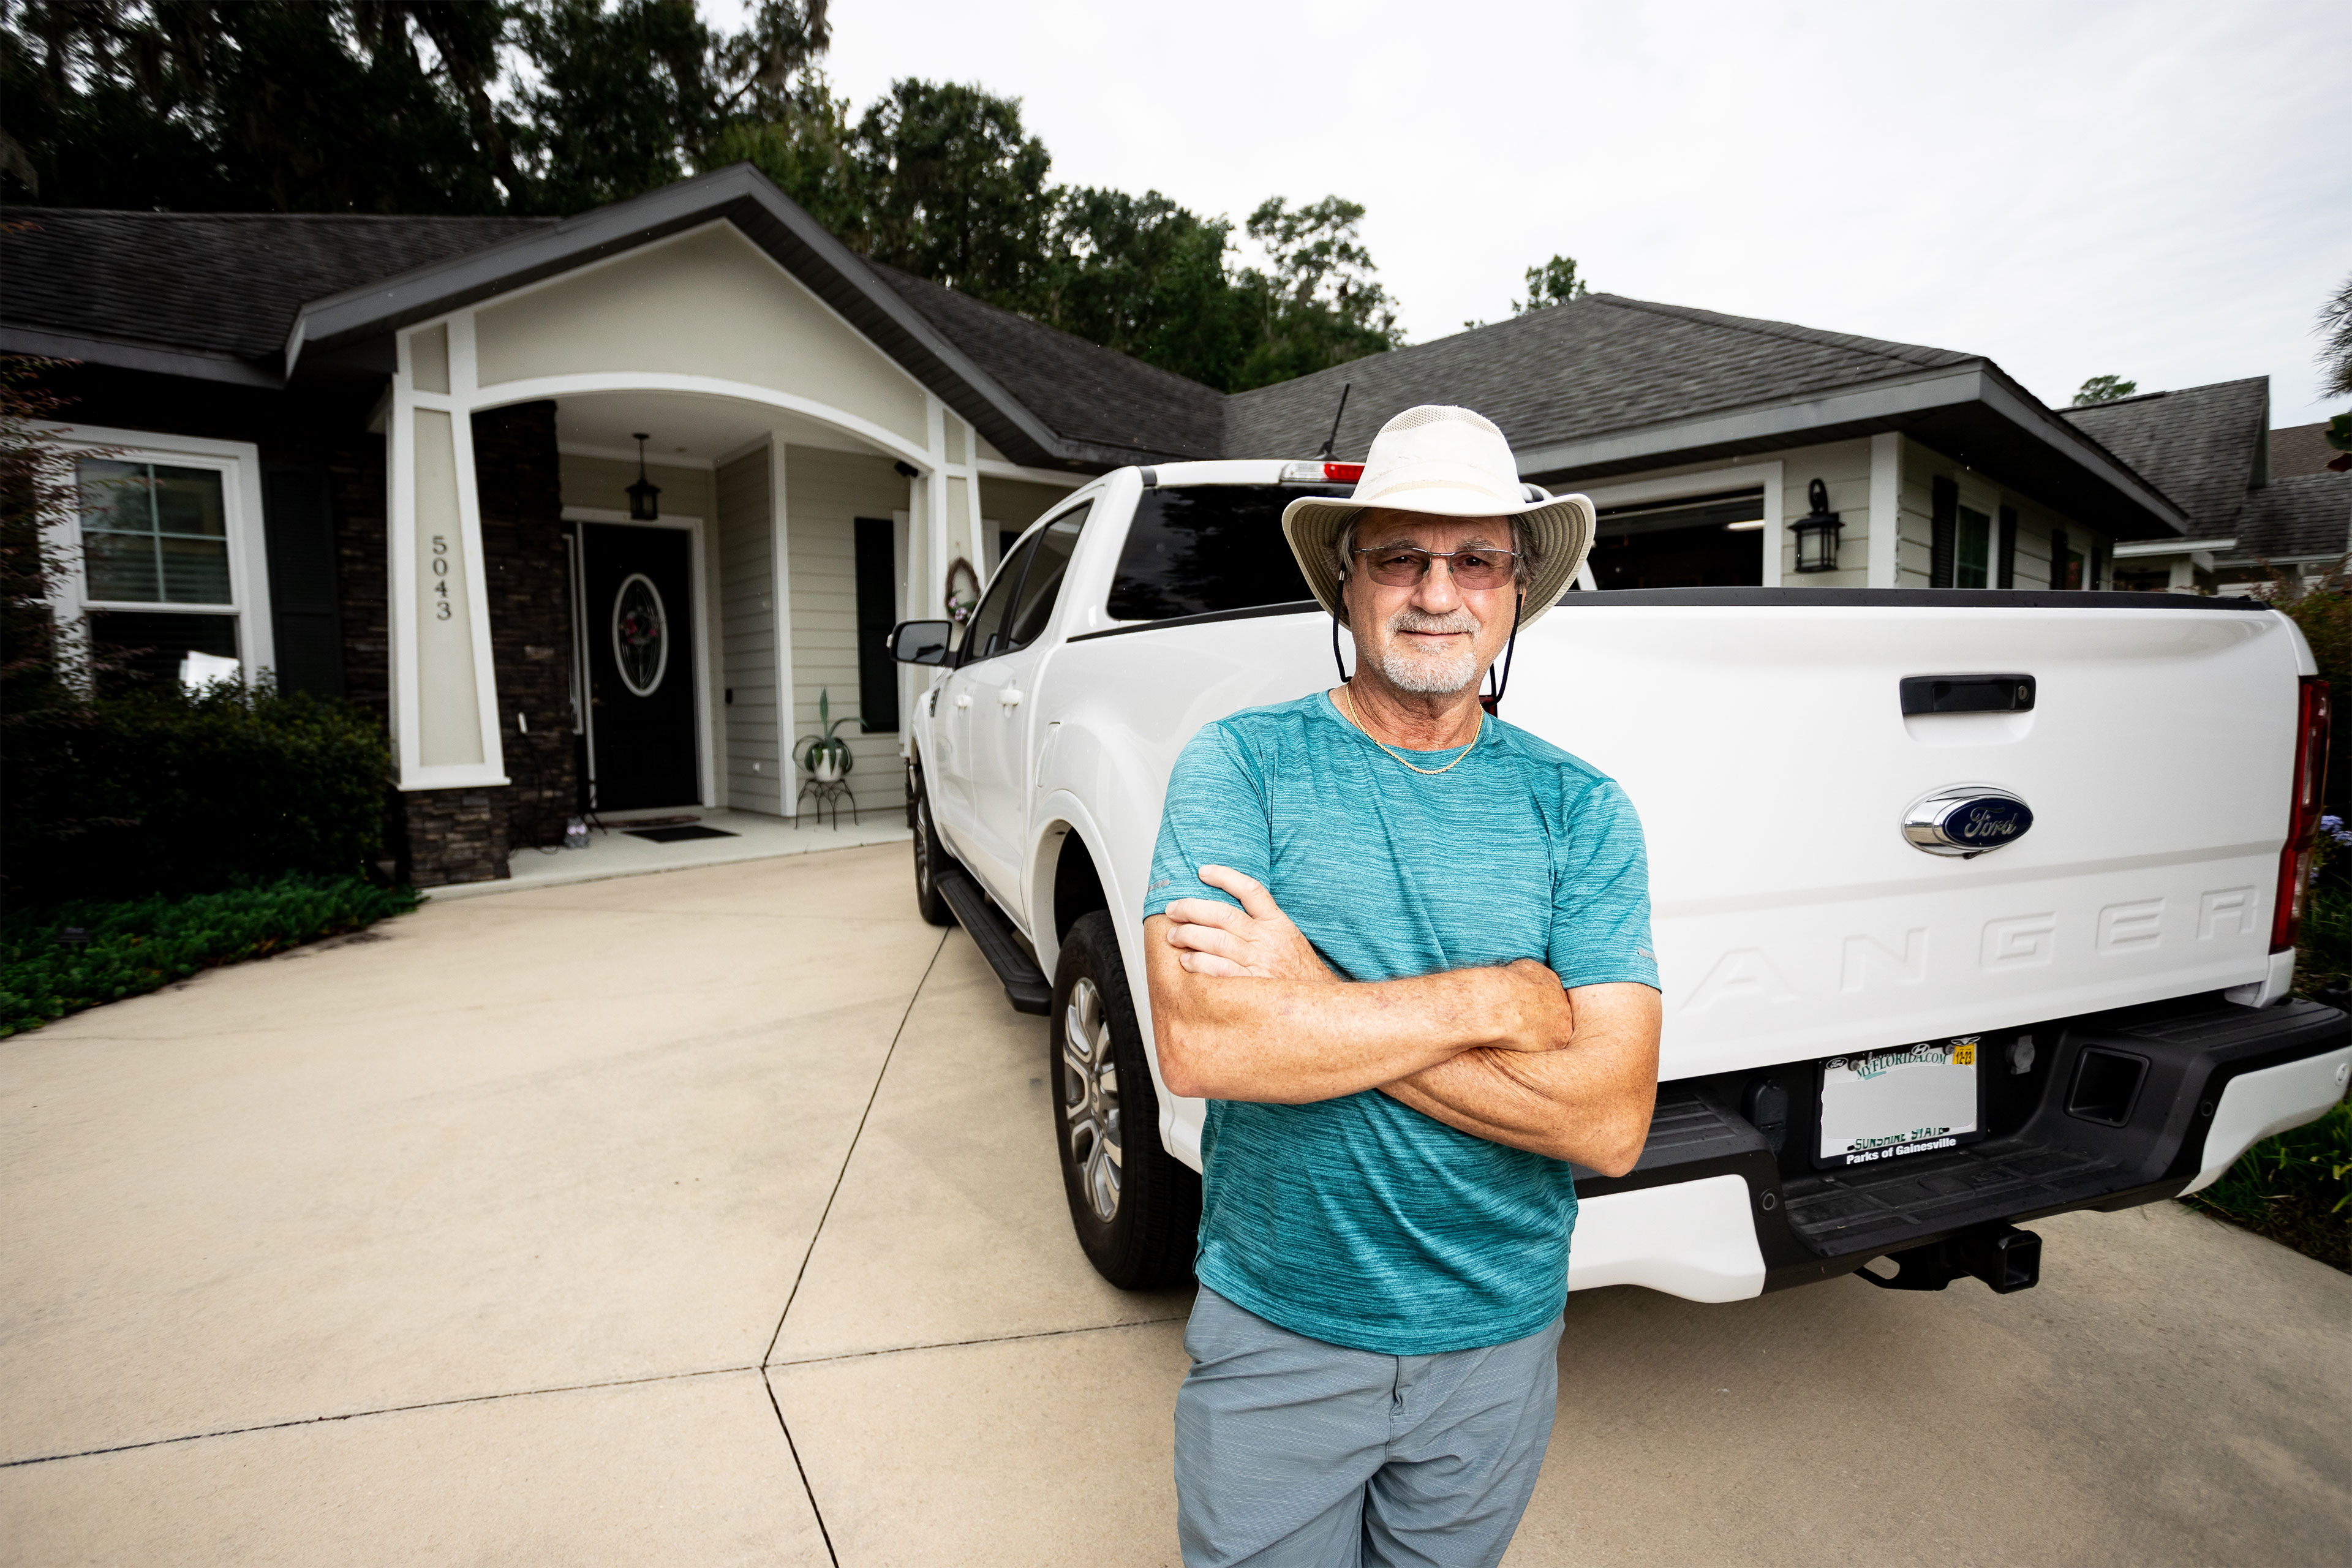 A man with his arms crossed in leans against a white pickup truck parked in a driveway.